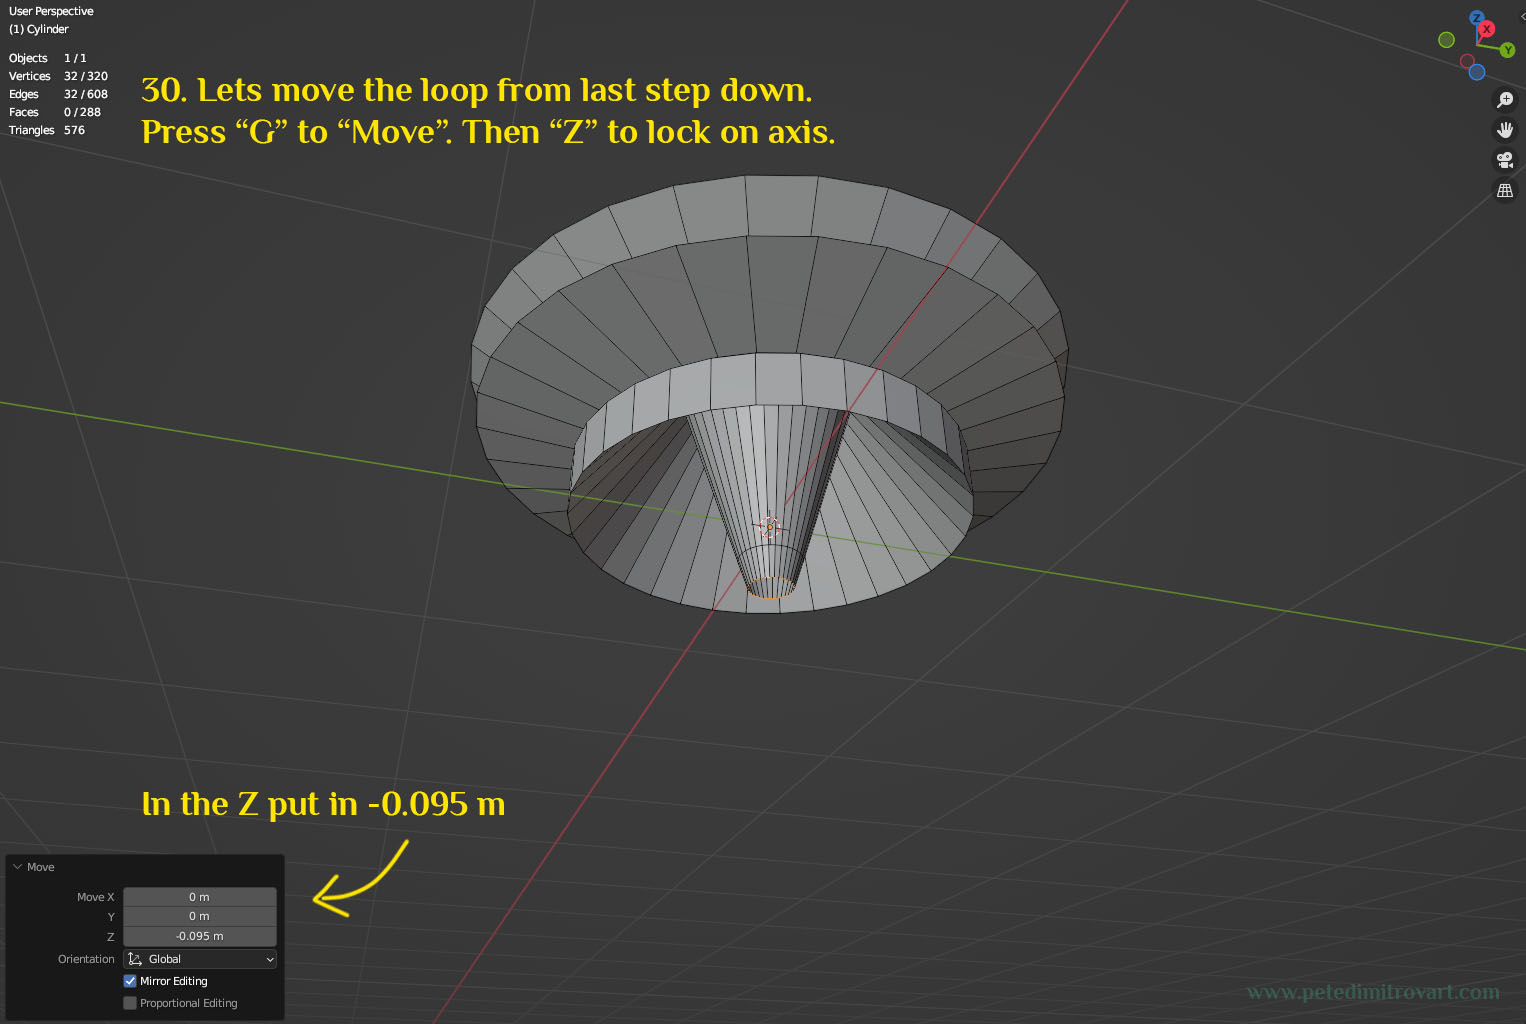 Screenshot showcasing the edge ring from last step, moved down, making for prolonged loop of faces. The yellow text is transcribed in the sentence above the image.